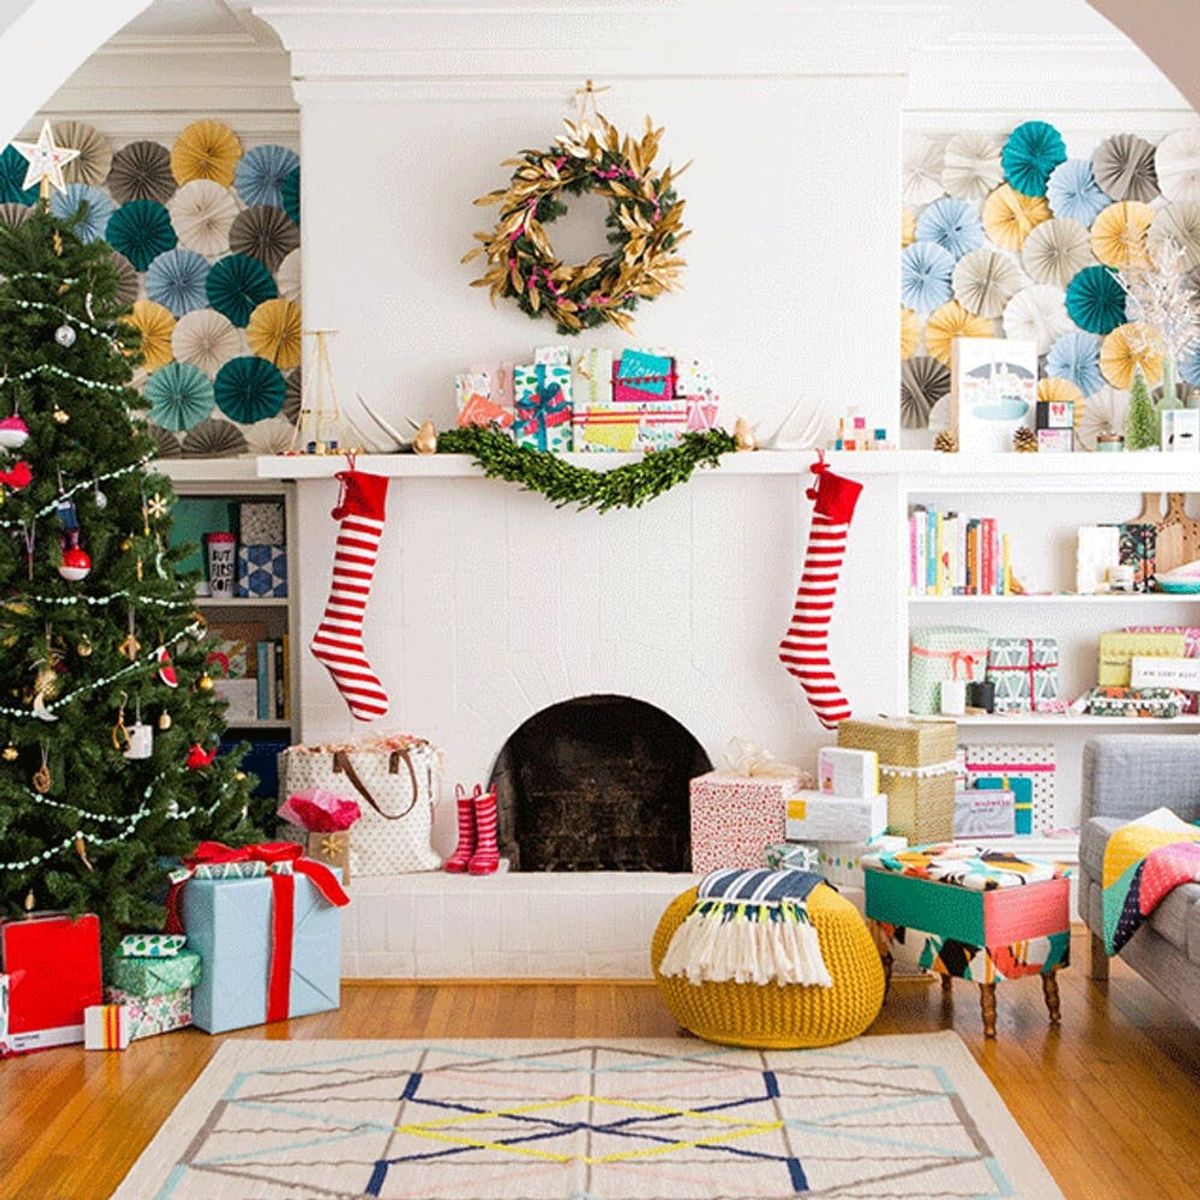 9 Non-Traditional Holiday Decor Ideas to Try This Year